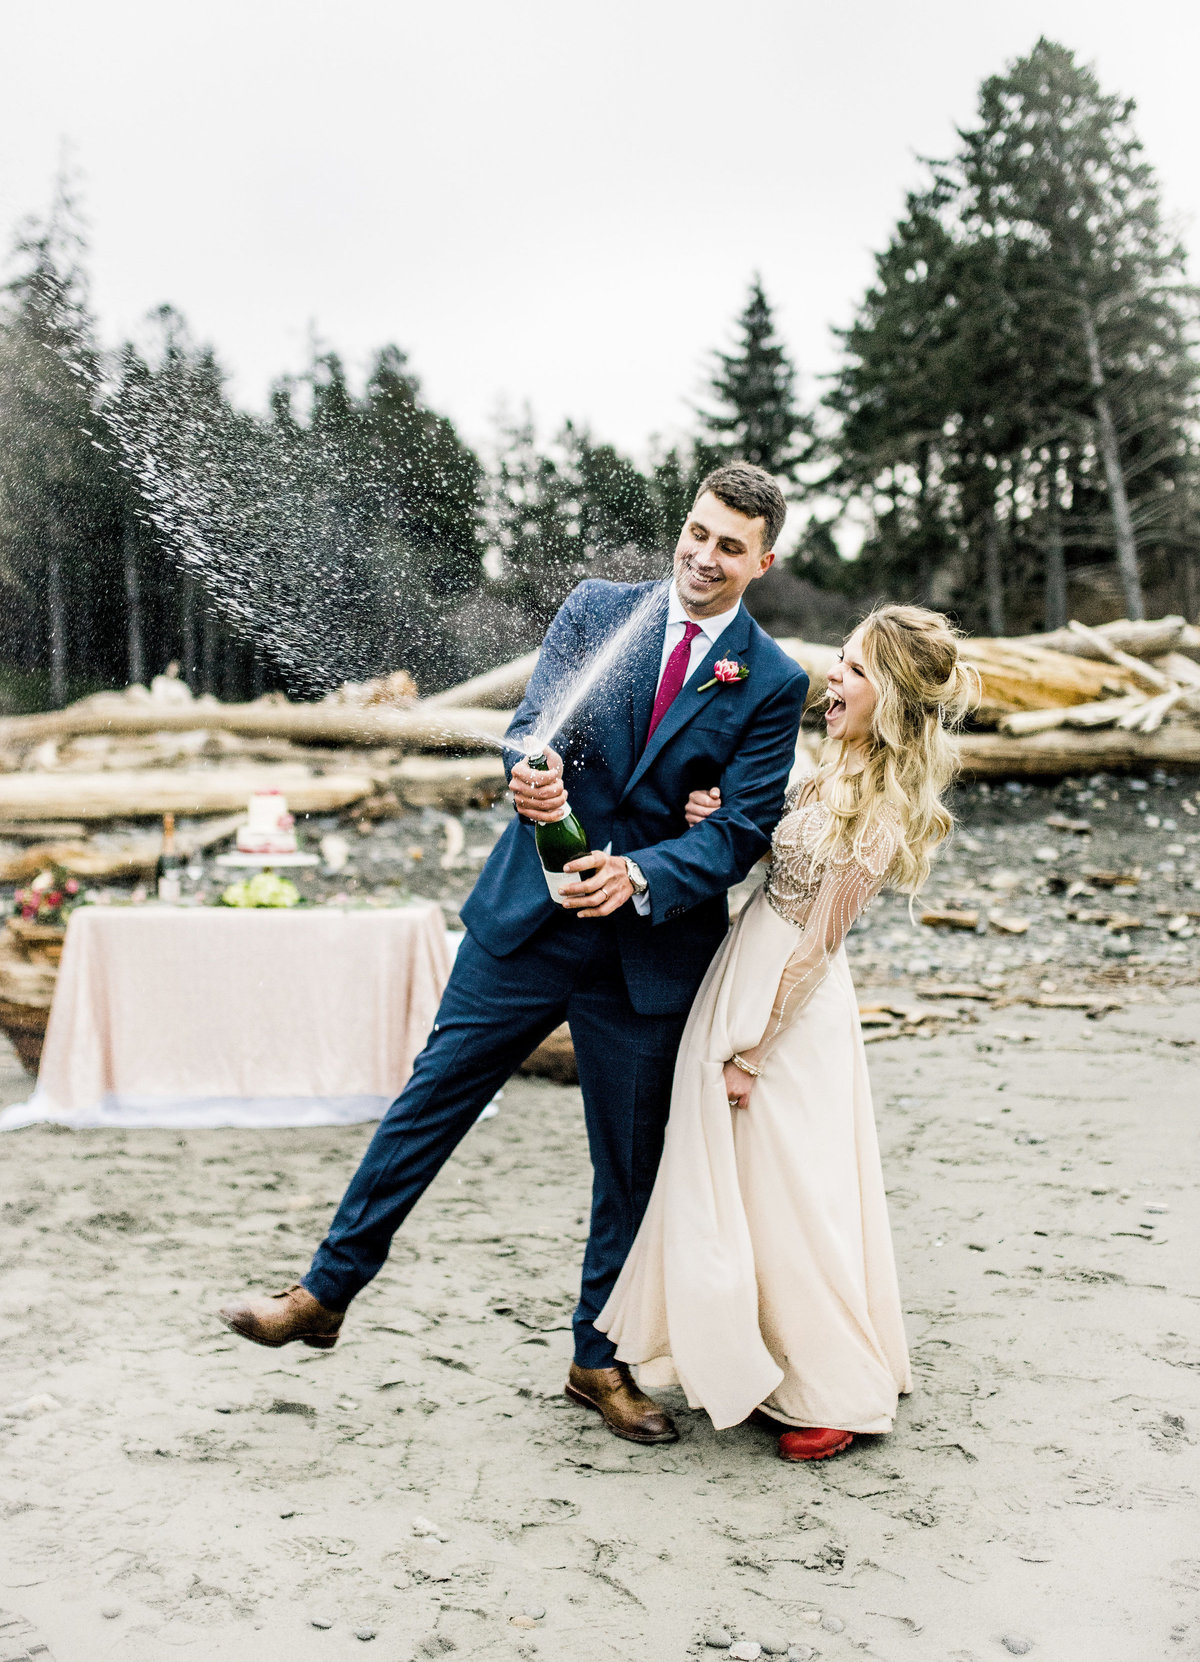 Brandon and Danielle pop  champagne as captured by their elopment photographer